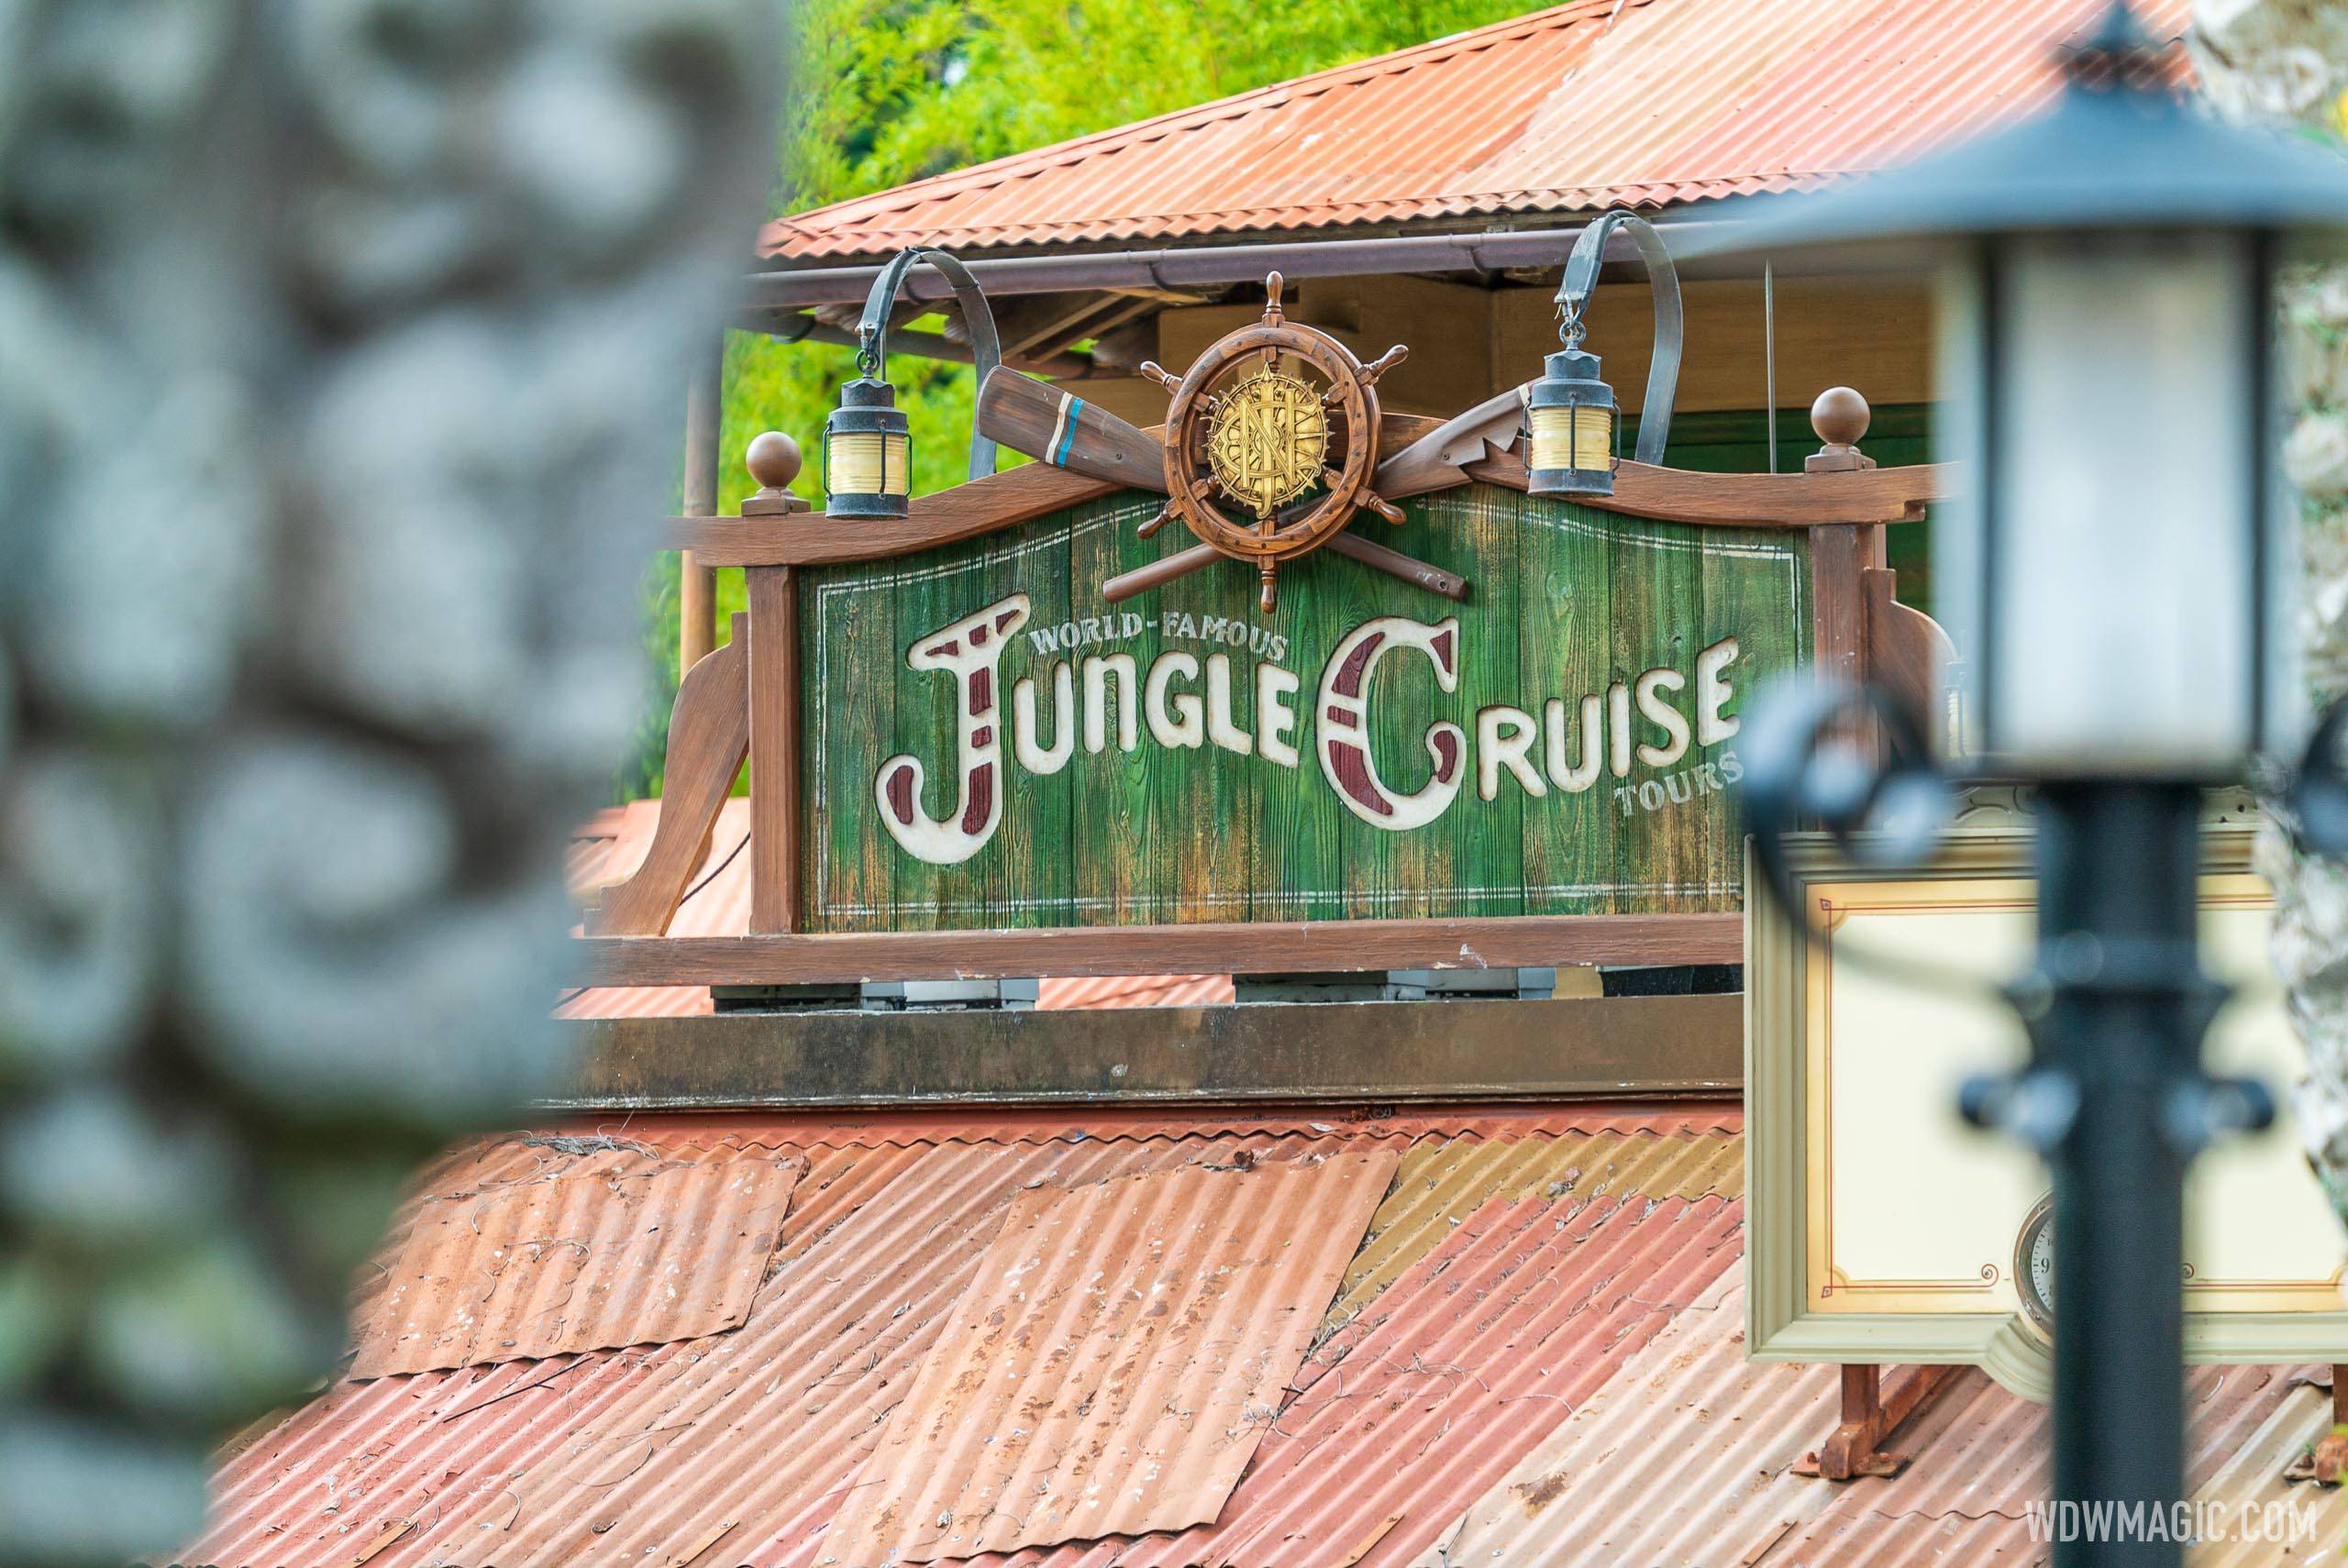 Jungle Cruise officially becomes 'World Famous' with more updates to the new main entrance sign